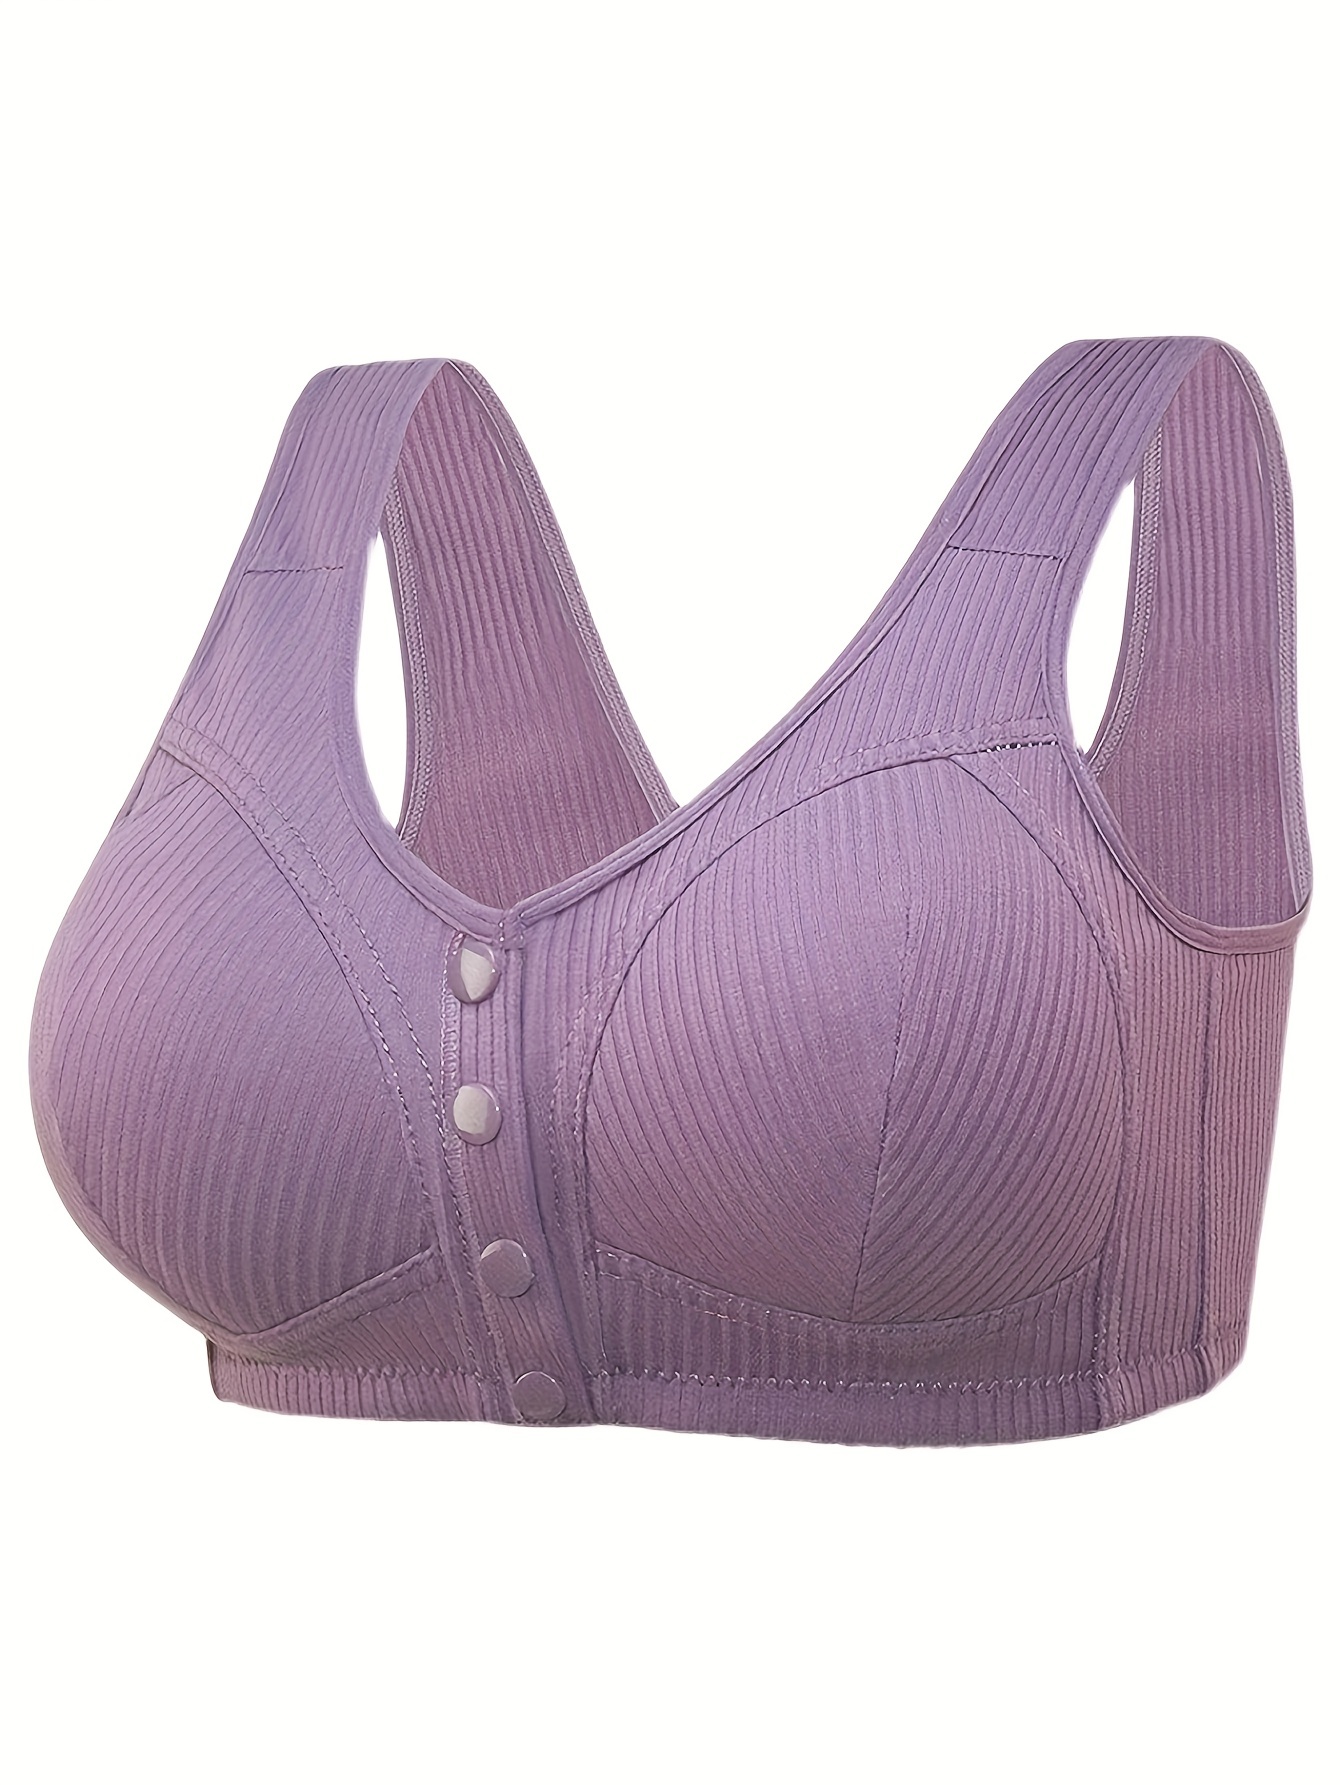 Cotton Sports Bras for Women TIANEK High Impact Front Closure Wirefree  Stappy Convertible Knix Bras for Women Wireless,Purple